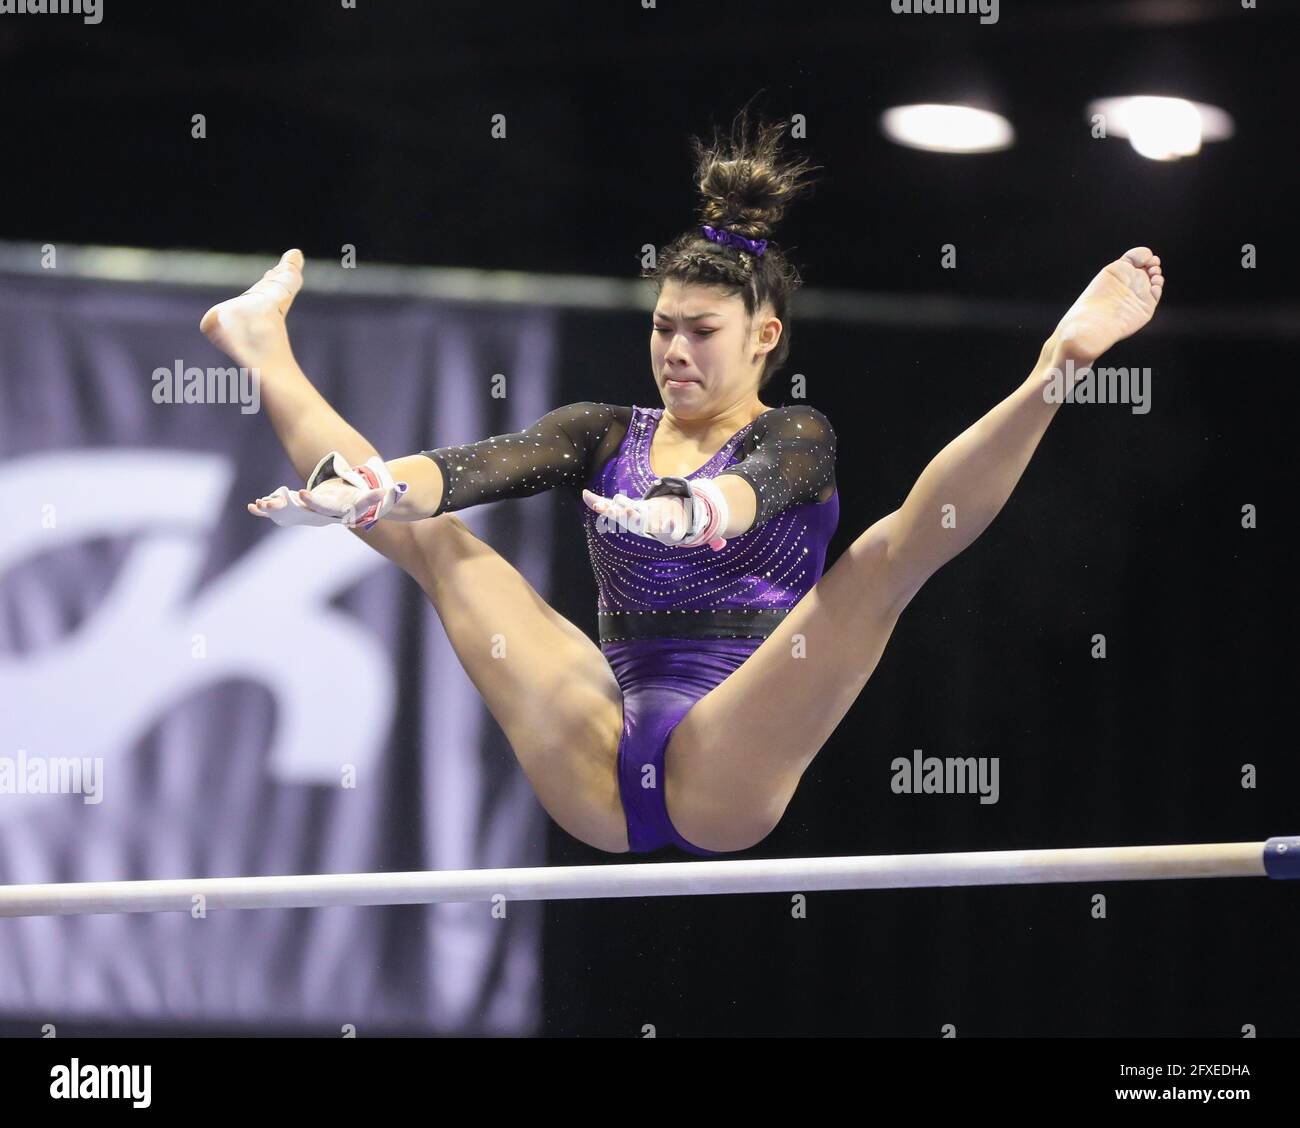 May 22, 2021: Kayla DiCello of Hill's Gymnastics performs on the uneven bars during the 2021 GK U.S. Classic at the Indiana Convention Center in Indianapolis, IN. Kyle Okita/CSM Stock Photo